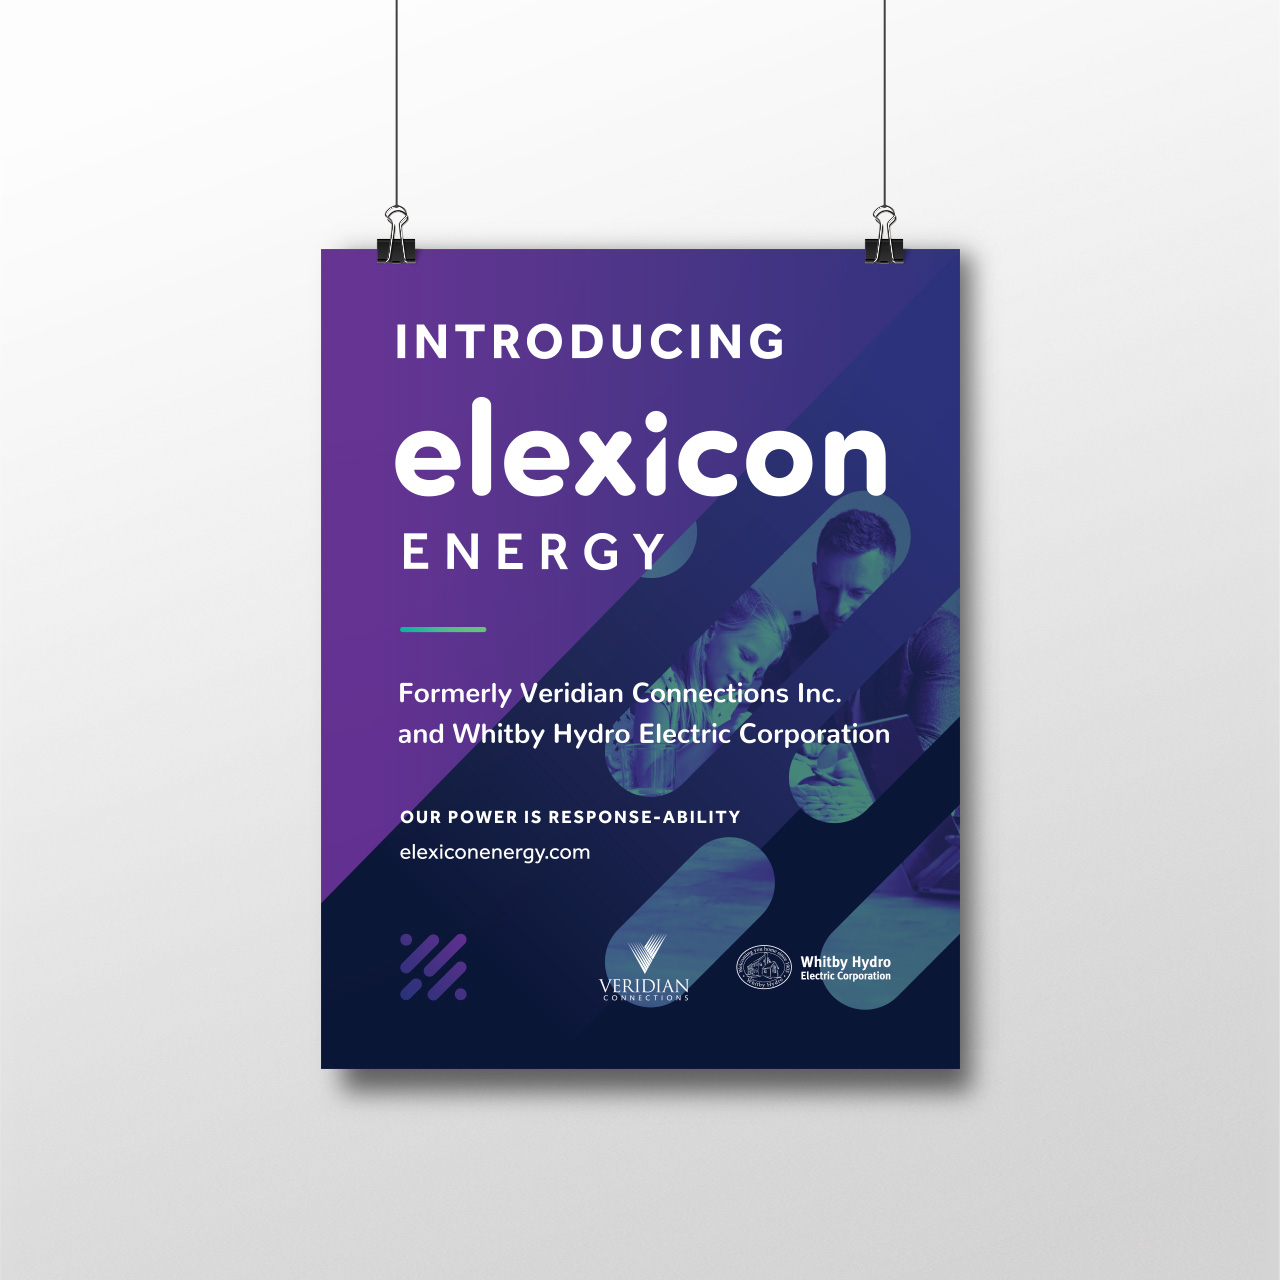 Elexicon branding displayed on a hanging sign